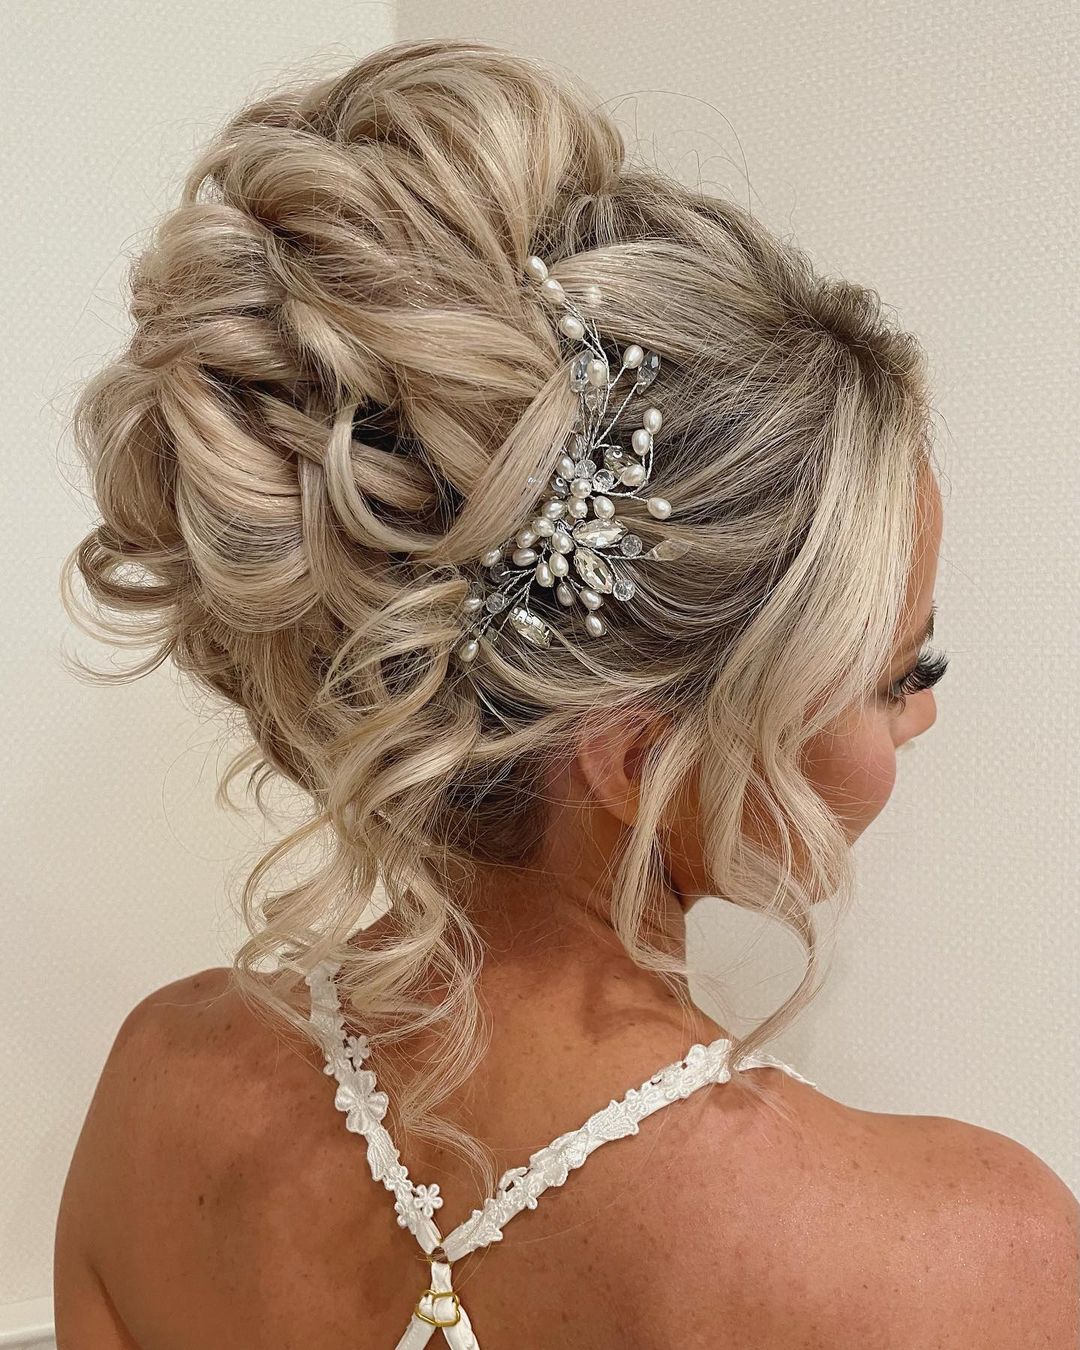 30 Gorgeous Bridal Hairstyles For Summer 2021 Weddings